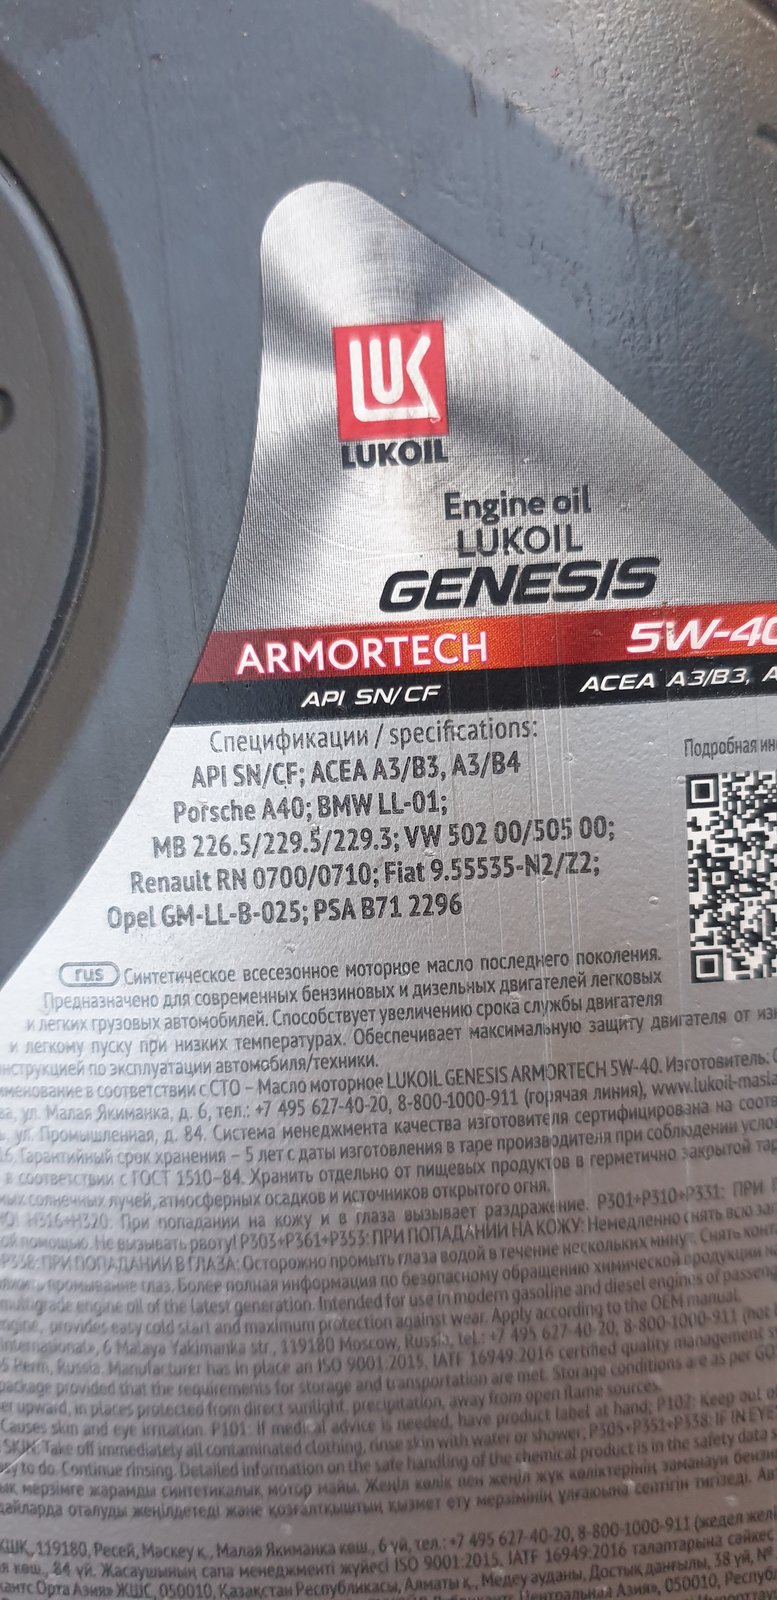 Lukoil Genesis Armortech 5w-40 GM. Лукойл Генезис 5-40 502 505. Лукойл Генезис 5w40 допуск 502-505. Масло Лукойл VW 502 5w40. Масло лукойл 505